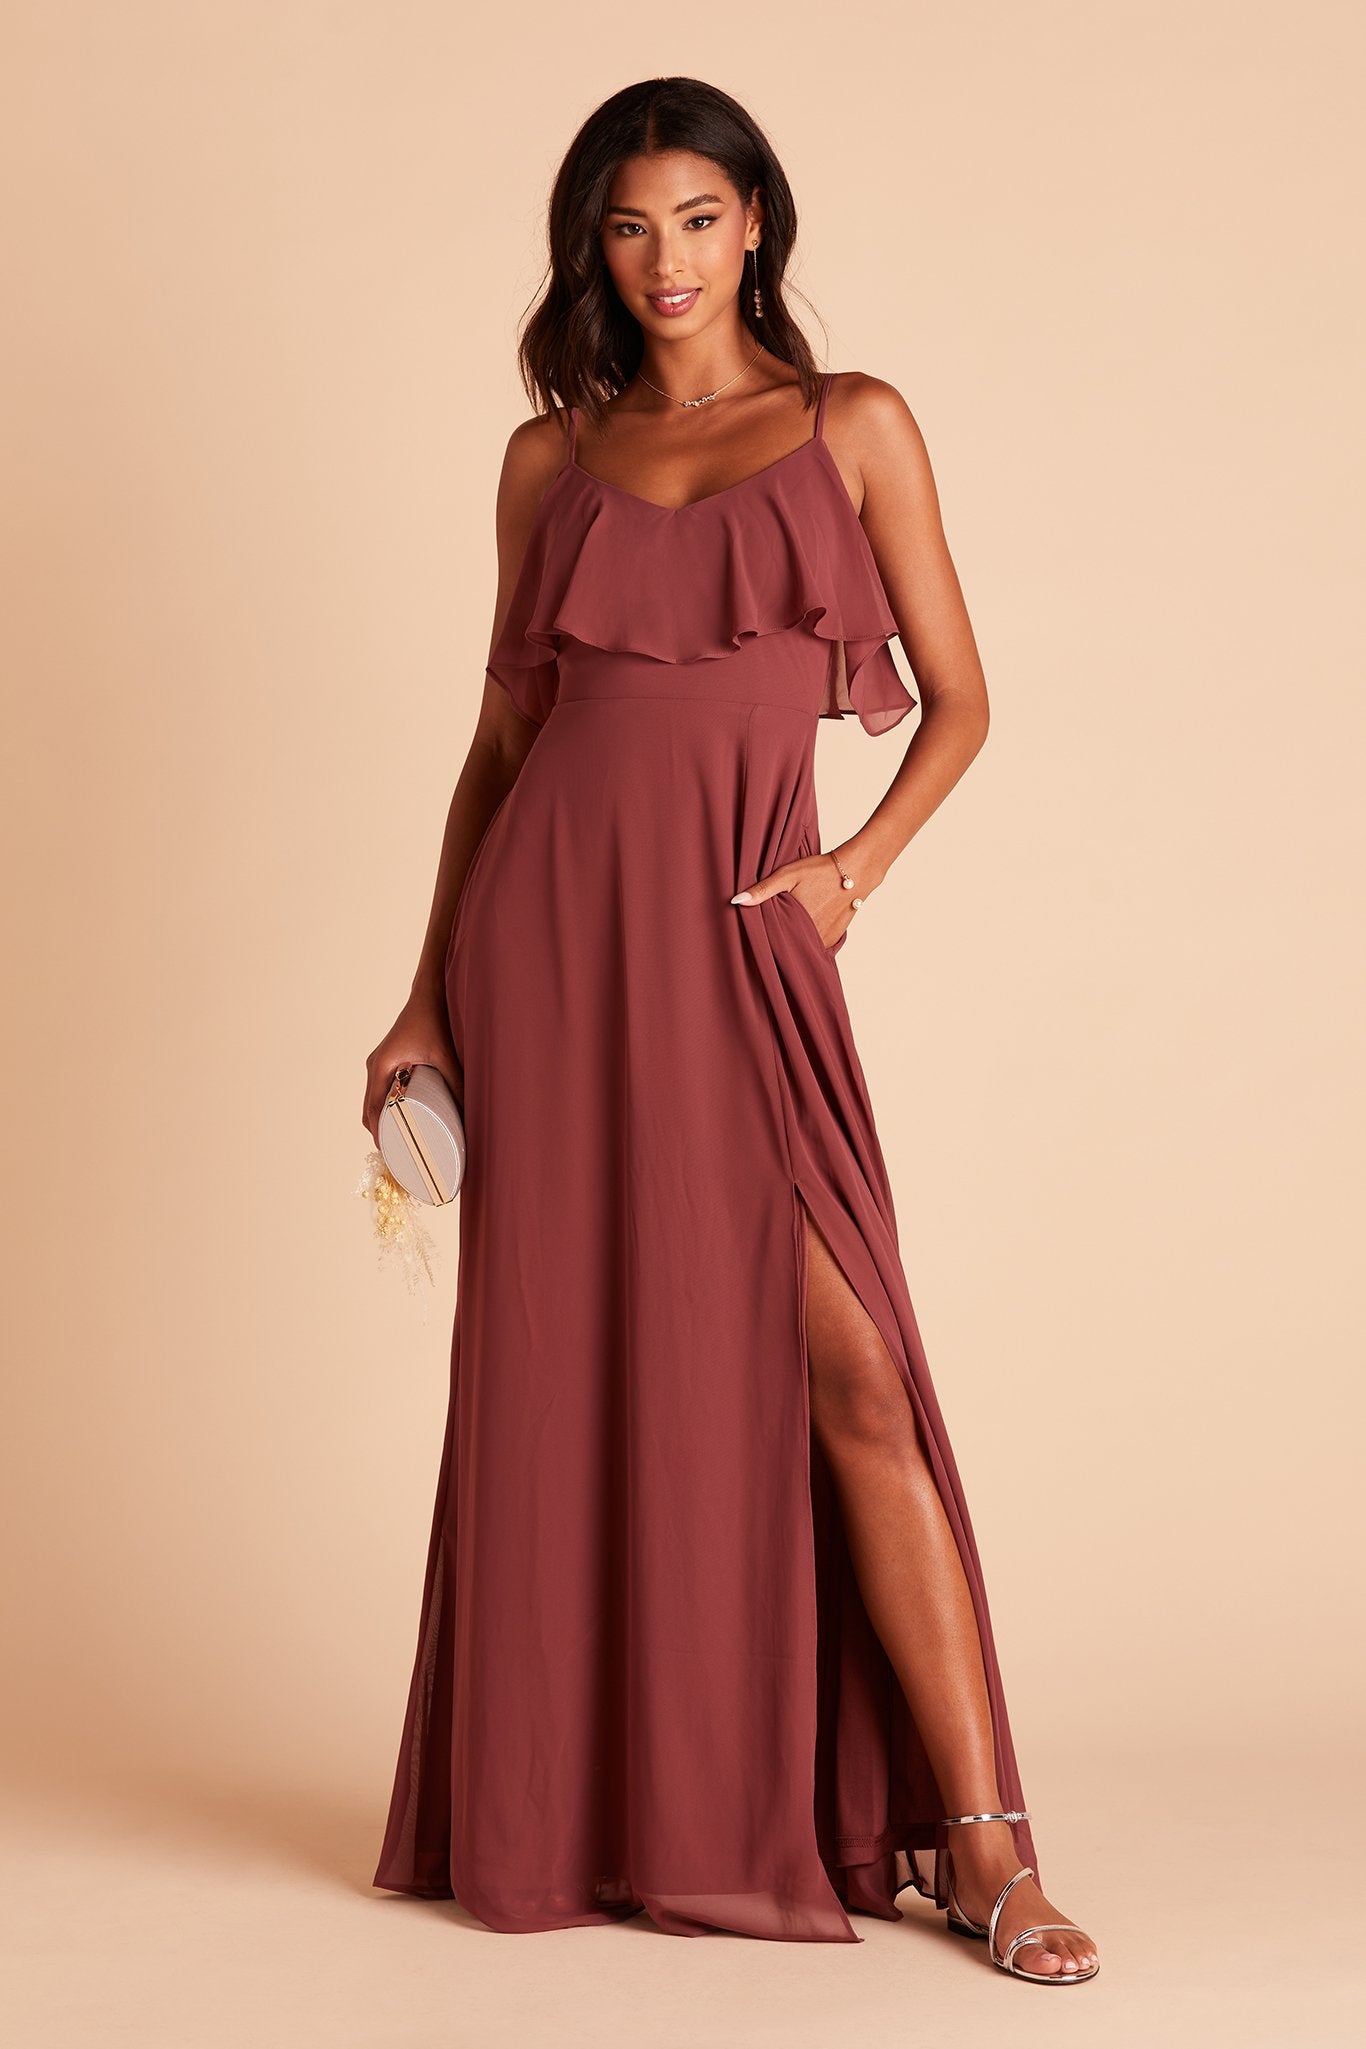 Jane convertible bridesmaid dress with slit in rosewood chiffon by Birdy Grey, front view with hand in pocket